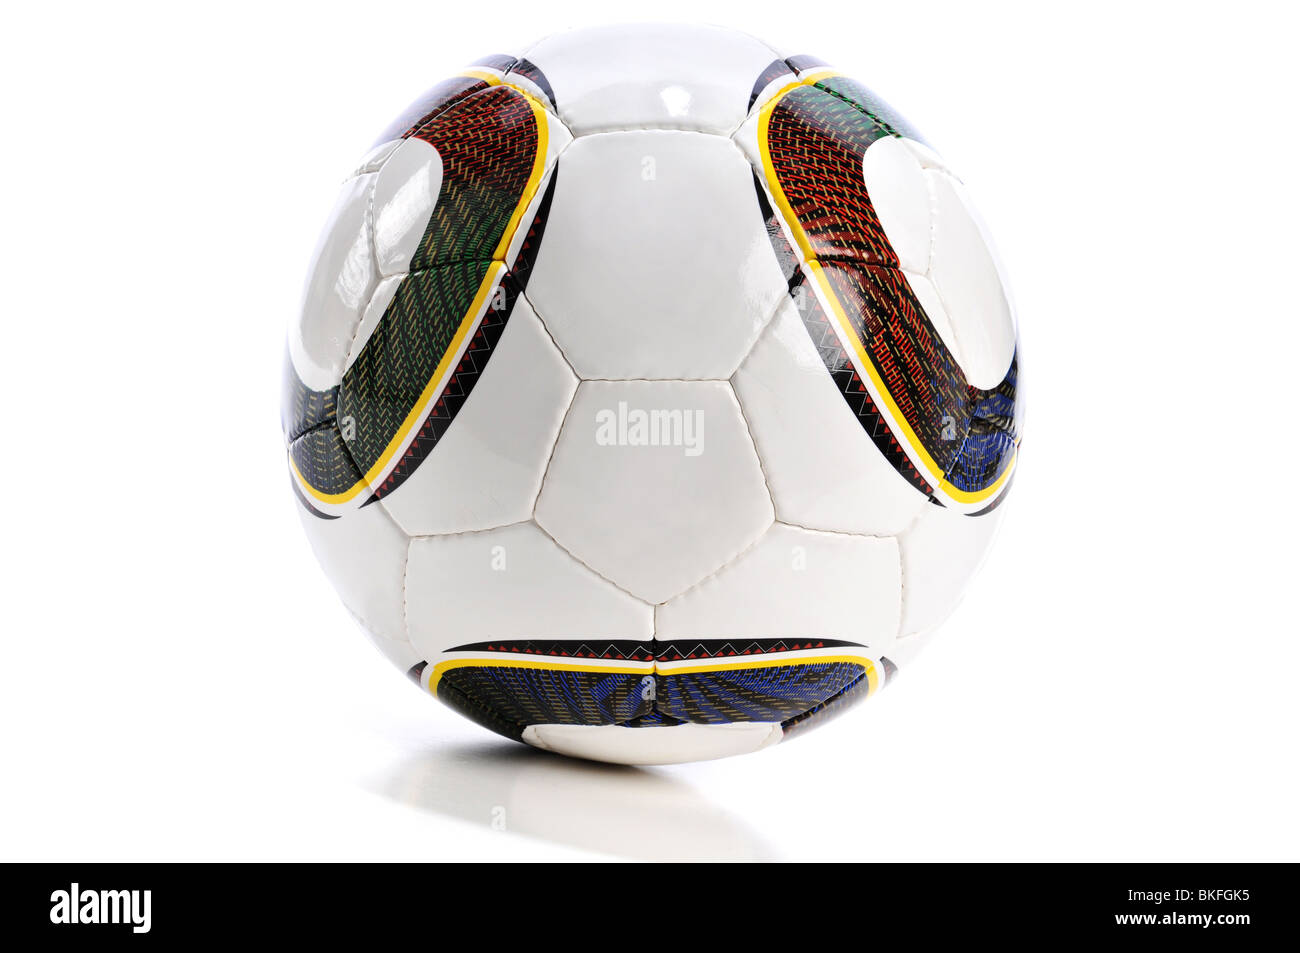 SOUTH AFRICA- June 11 to July 11: 2010 FIFA official soccer ball, South Africa Jun 11 to July 11 2010. Stock Photo